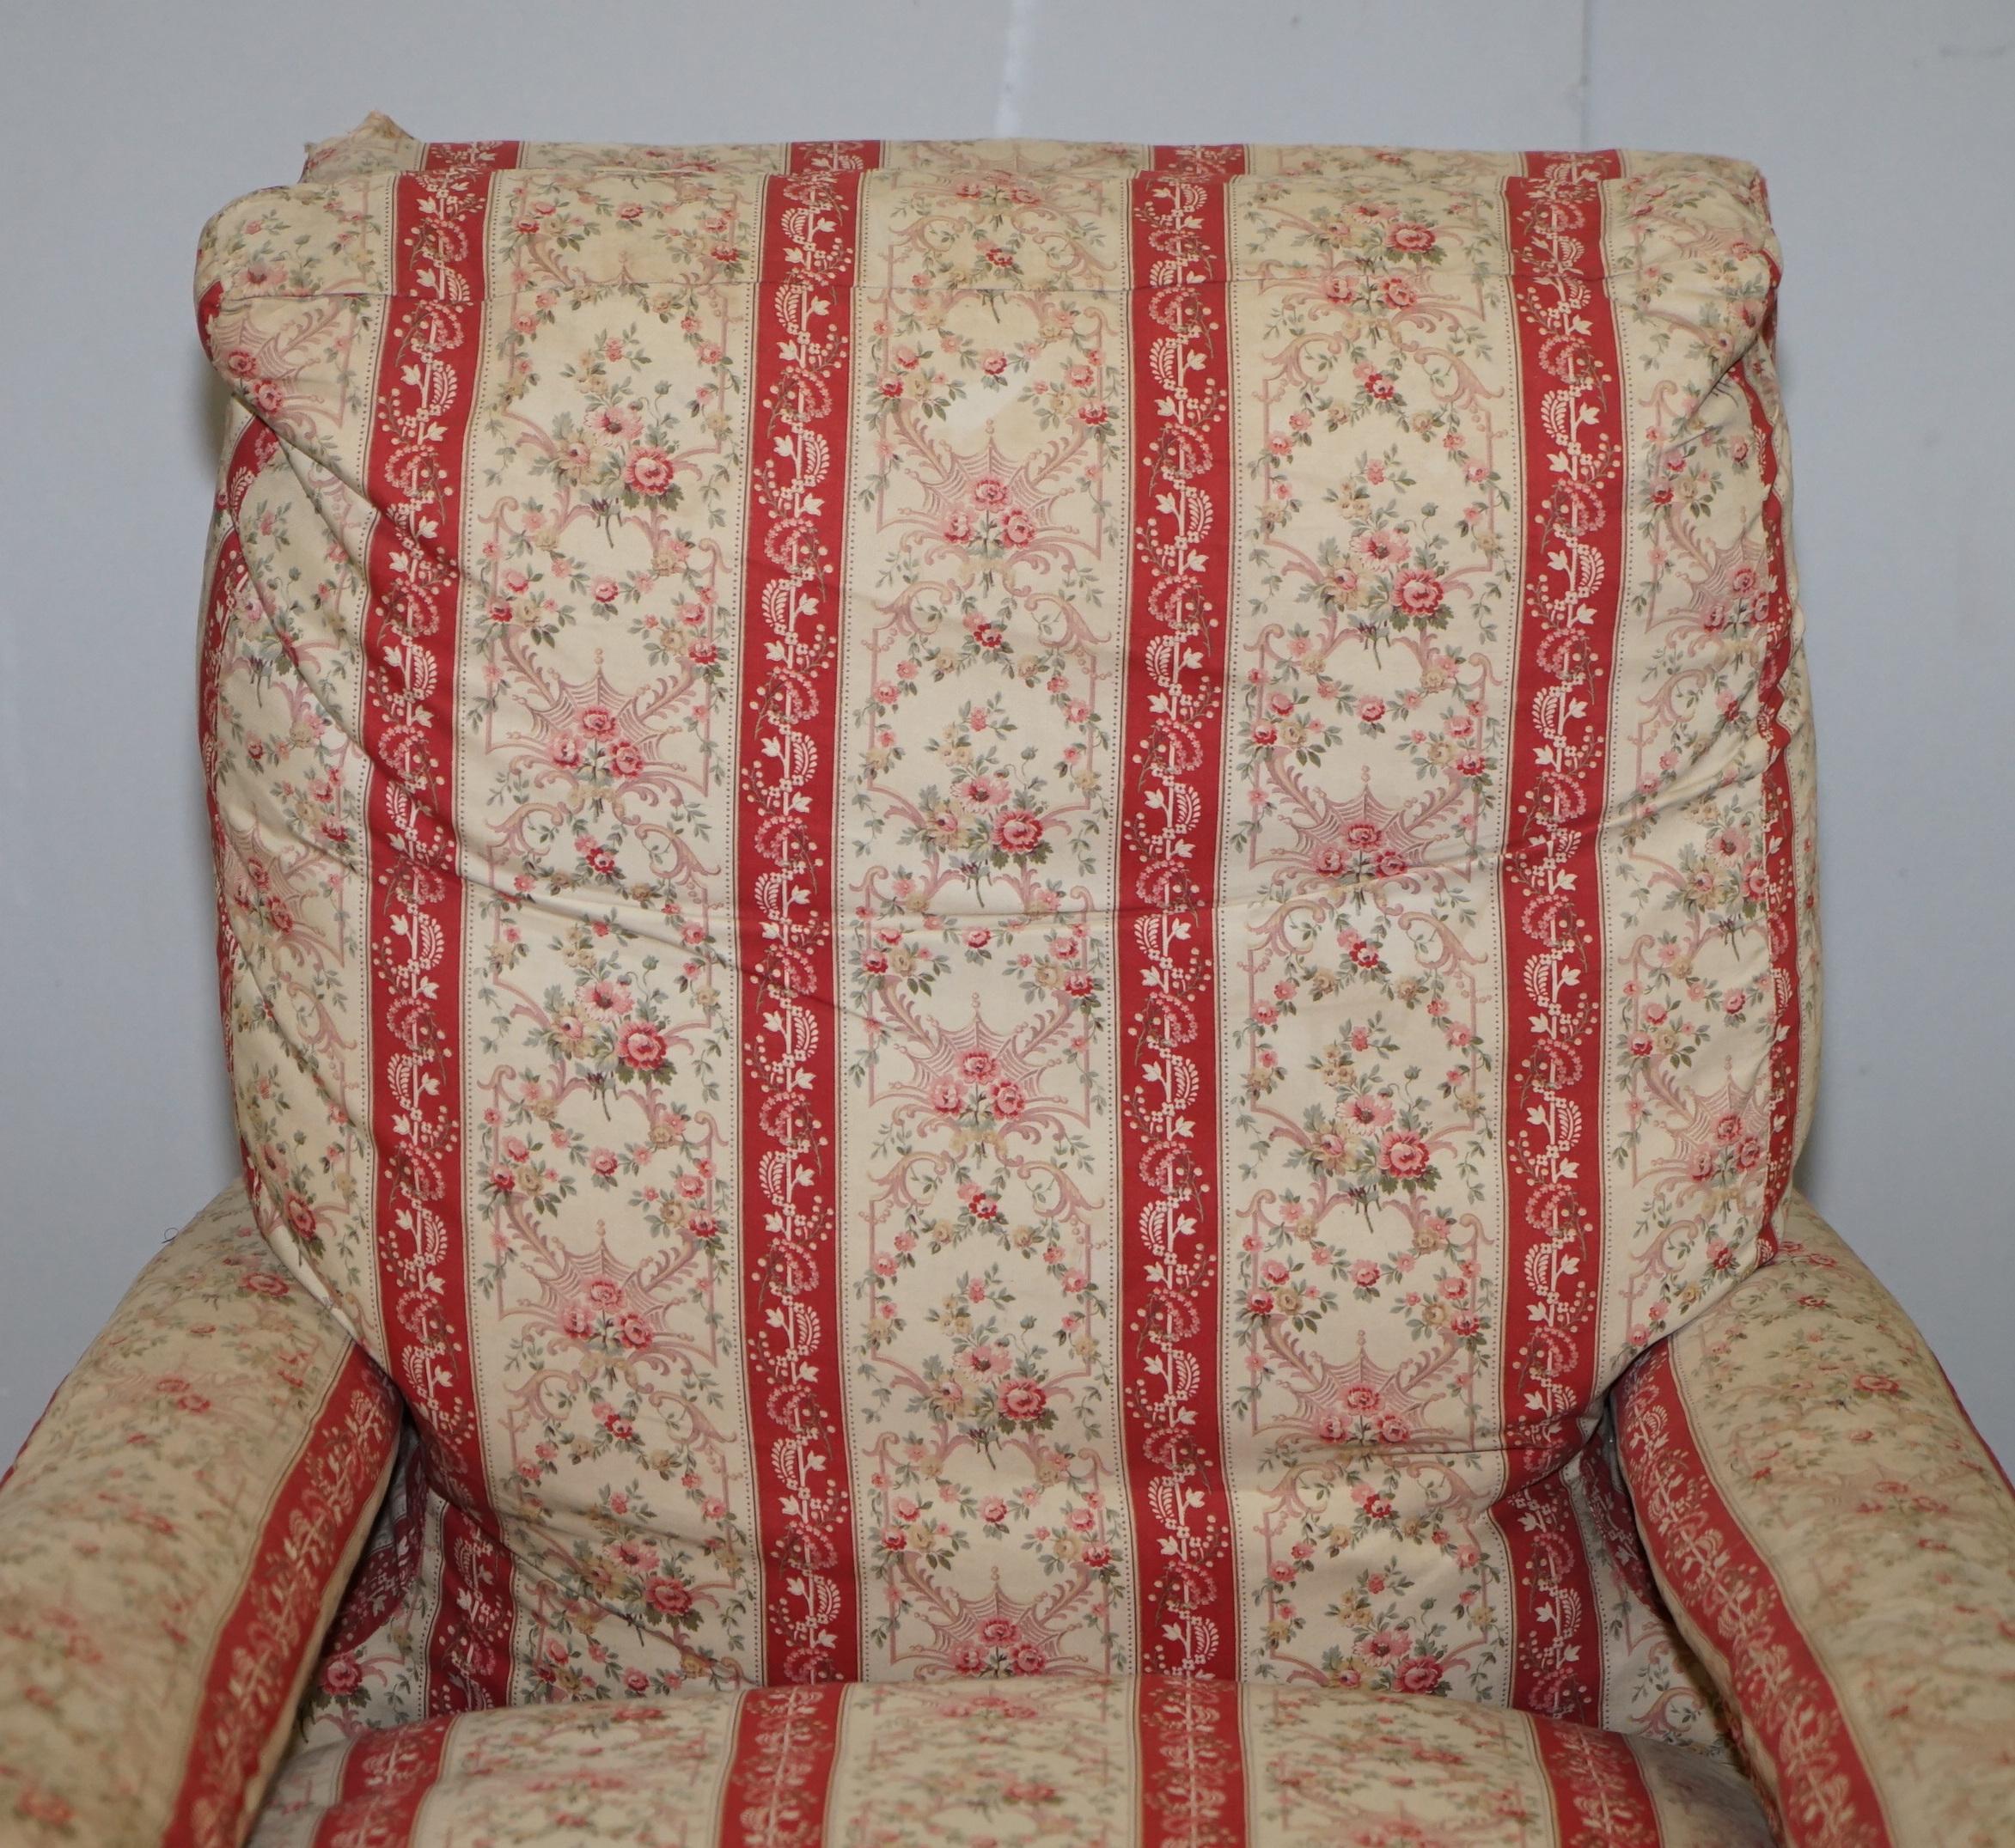 Upholstery Howard & Sons's Original Factory Ticking Fabriwc Antique Victorian Open Armchair